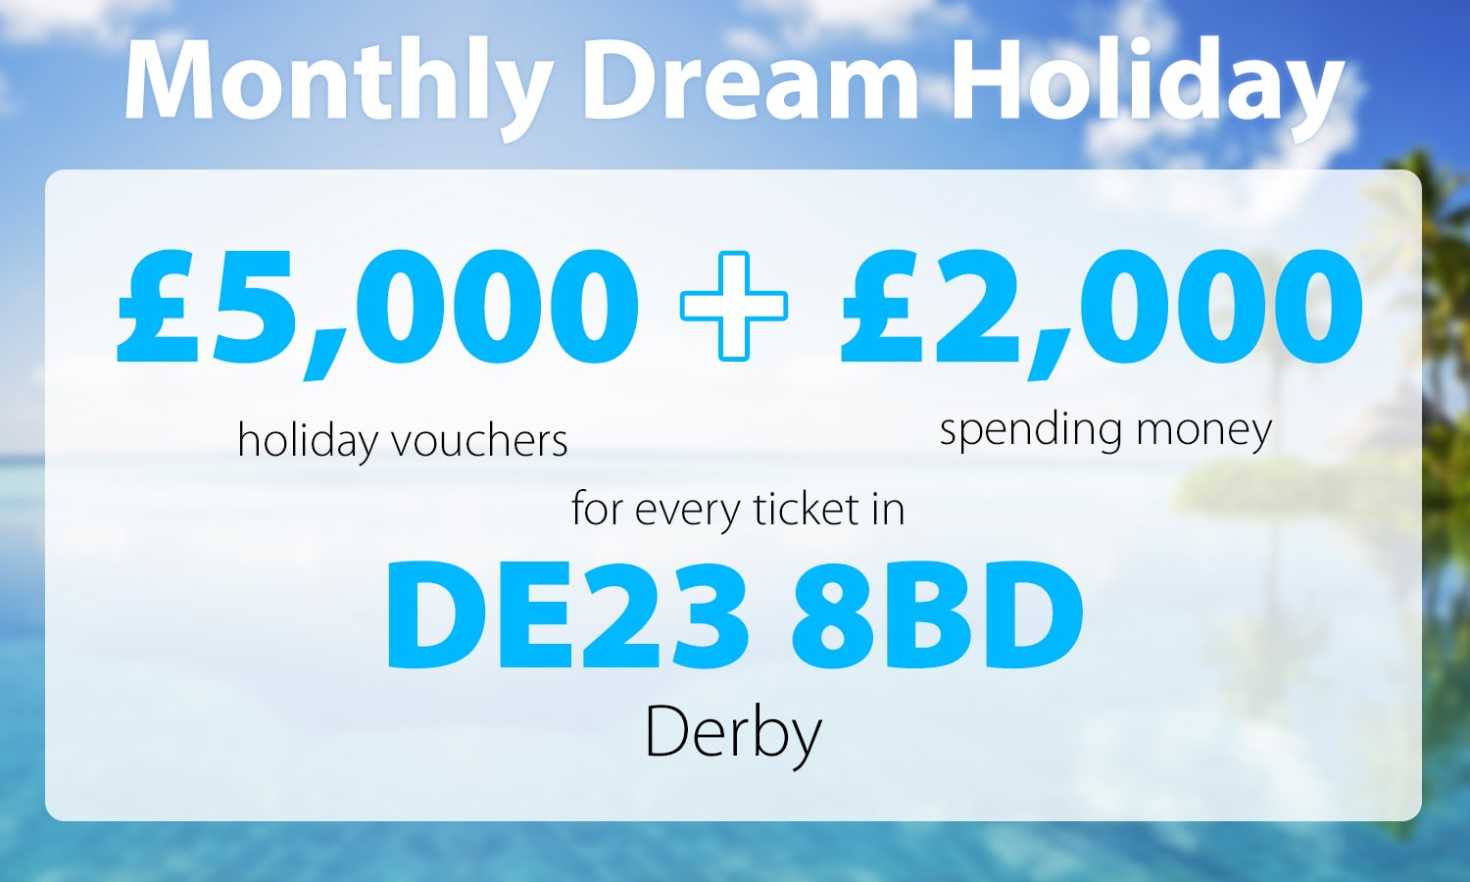 A Derby player will be taking a Dream Holiday thanks to their postcode getting lucky